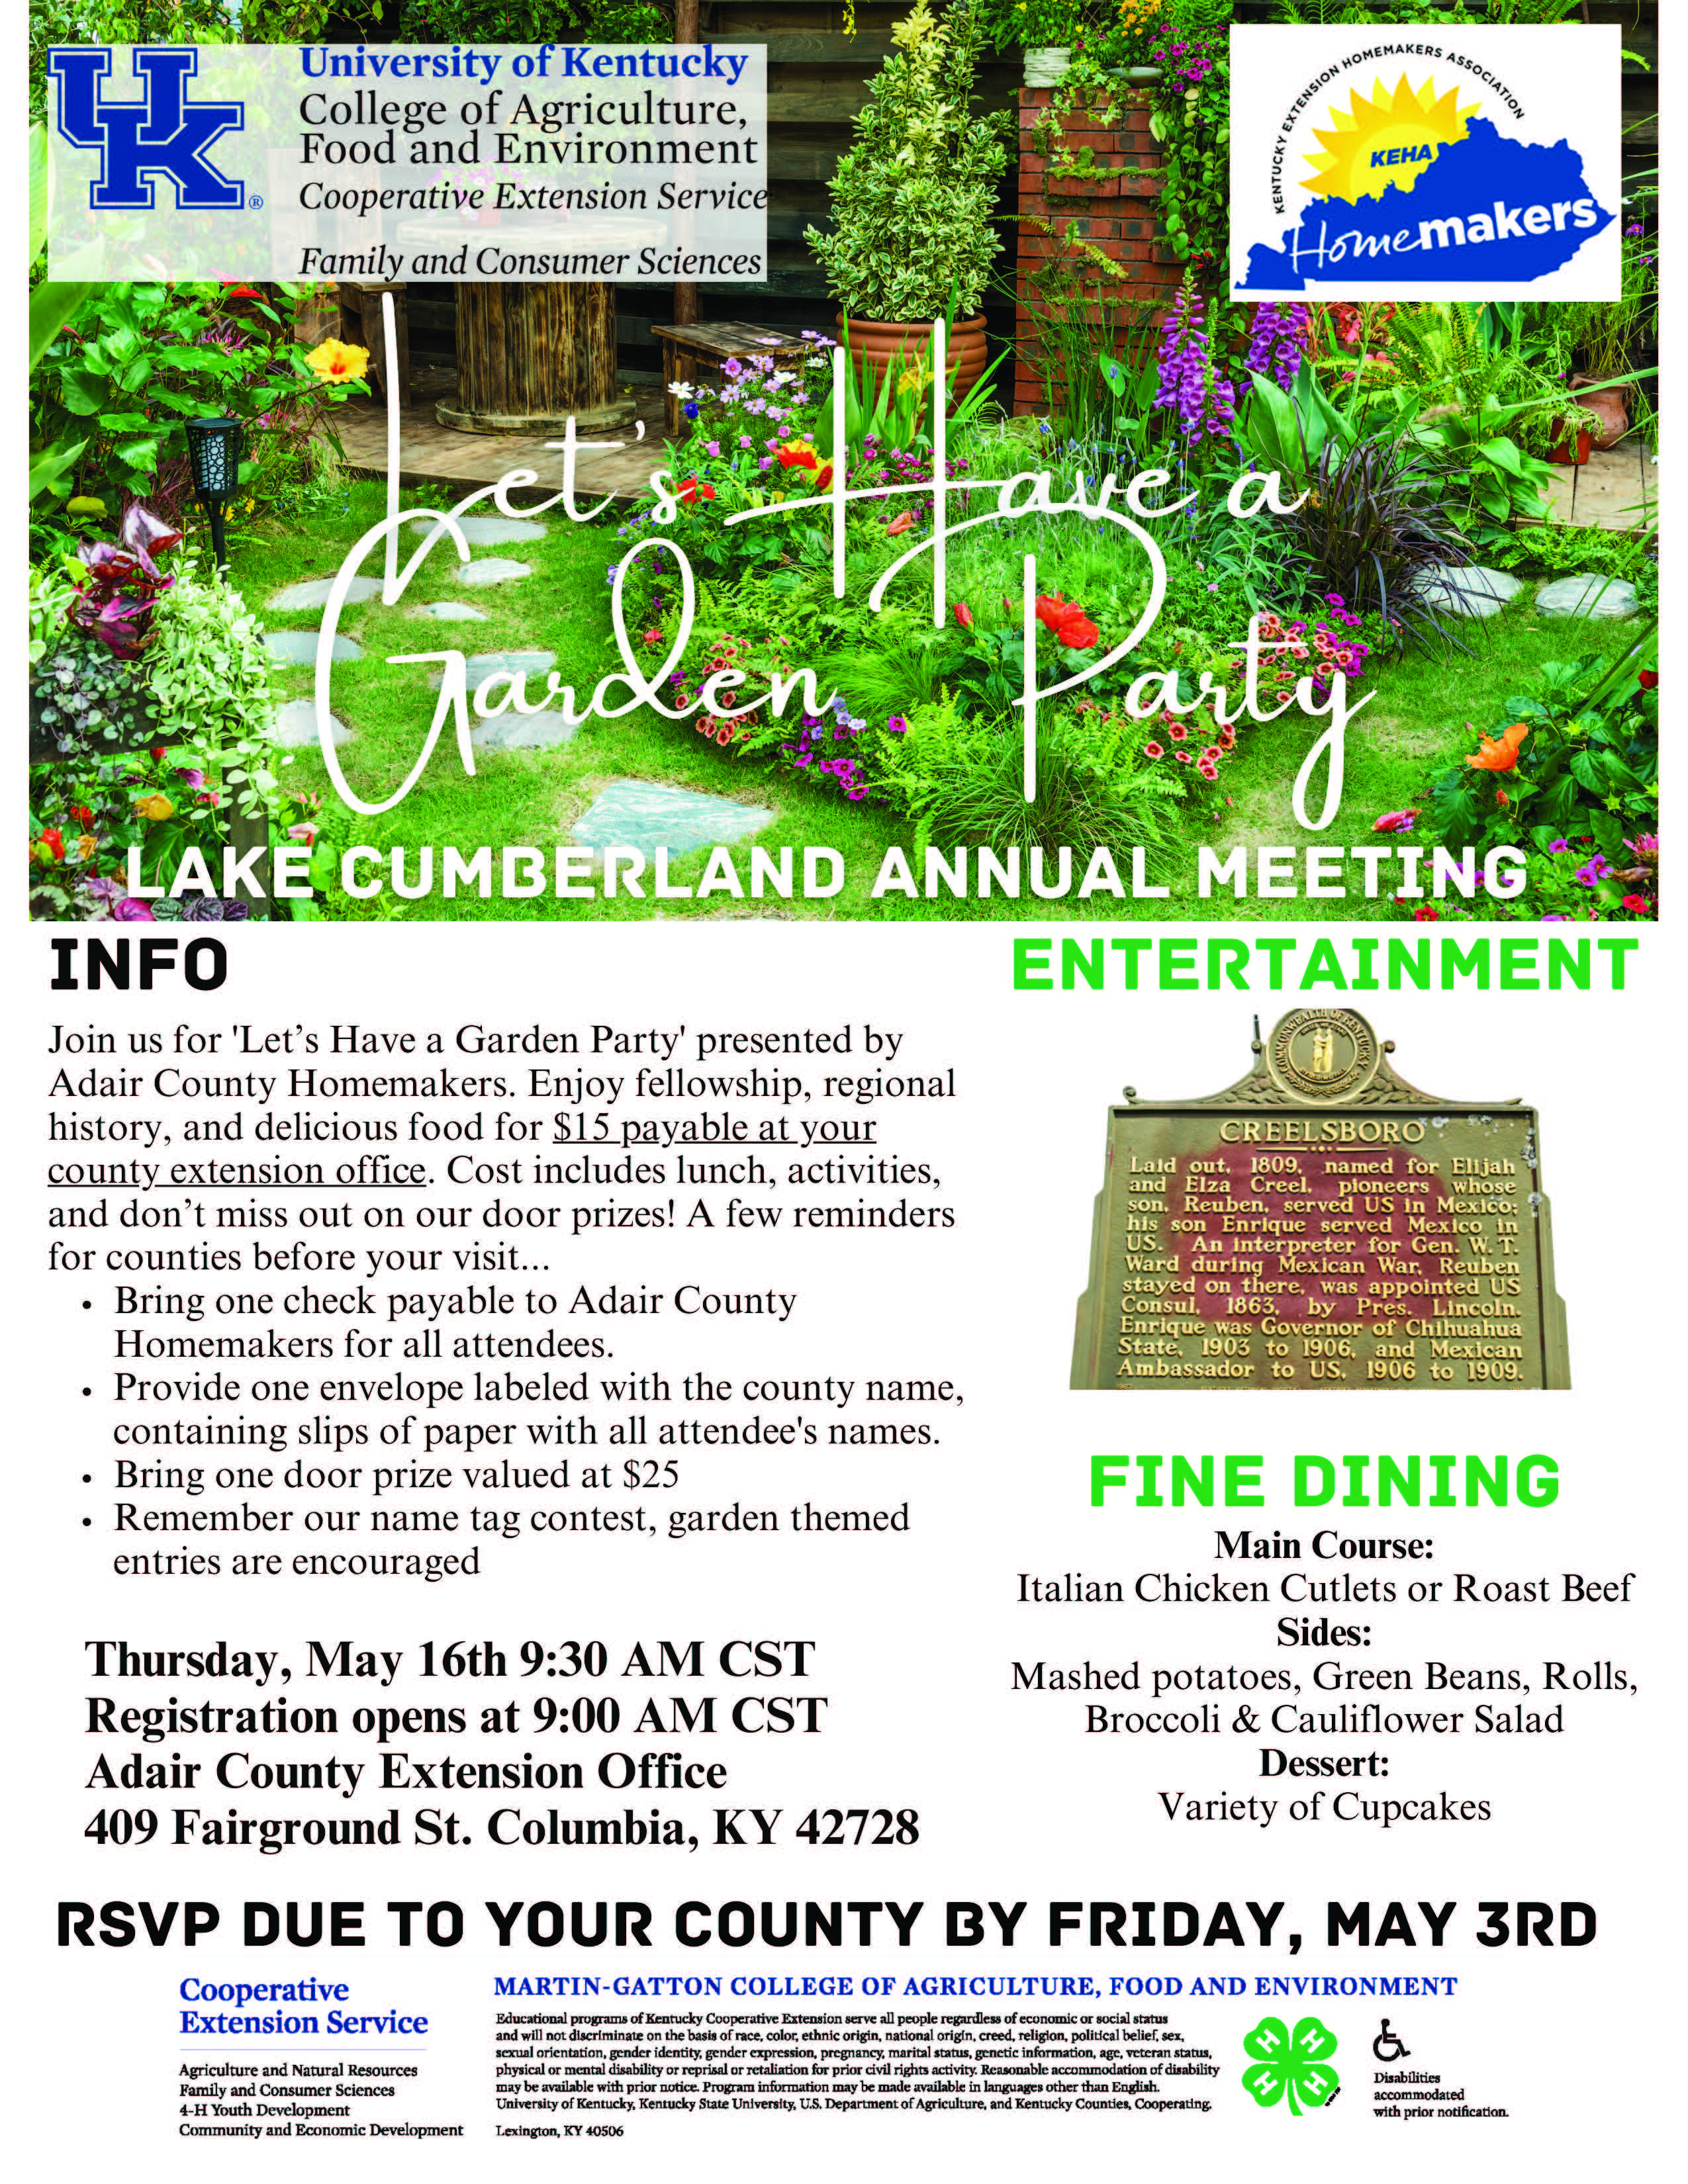 LCA Homemakers Annual Meeting Flyer